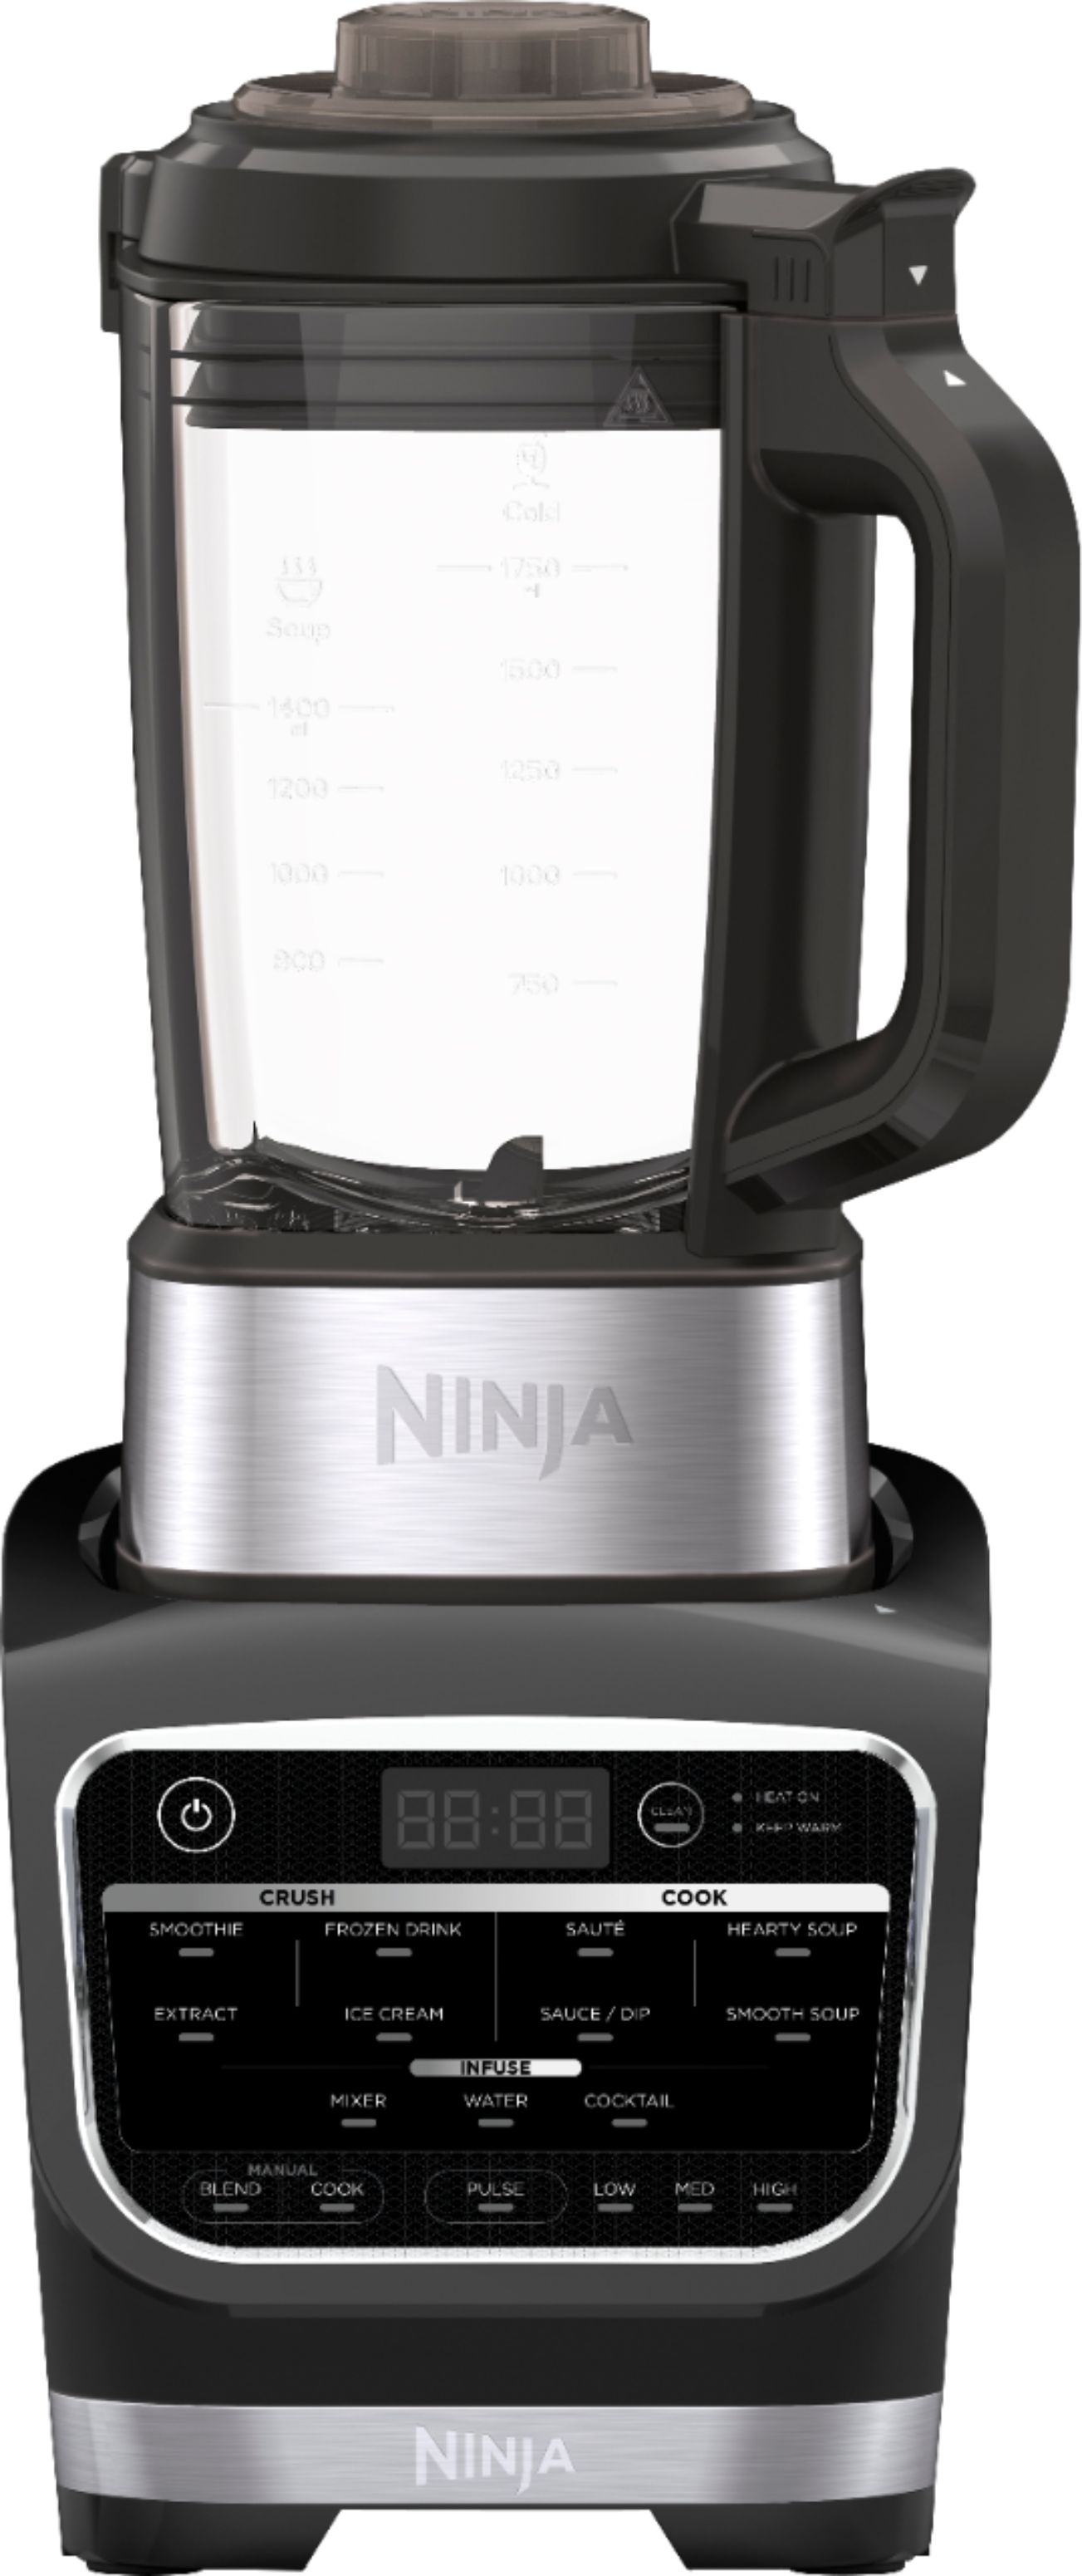 Ninja Foodi Cold & Hot Blender Review & Complete Guide - The